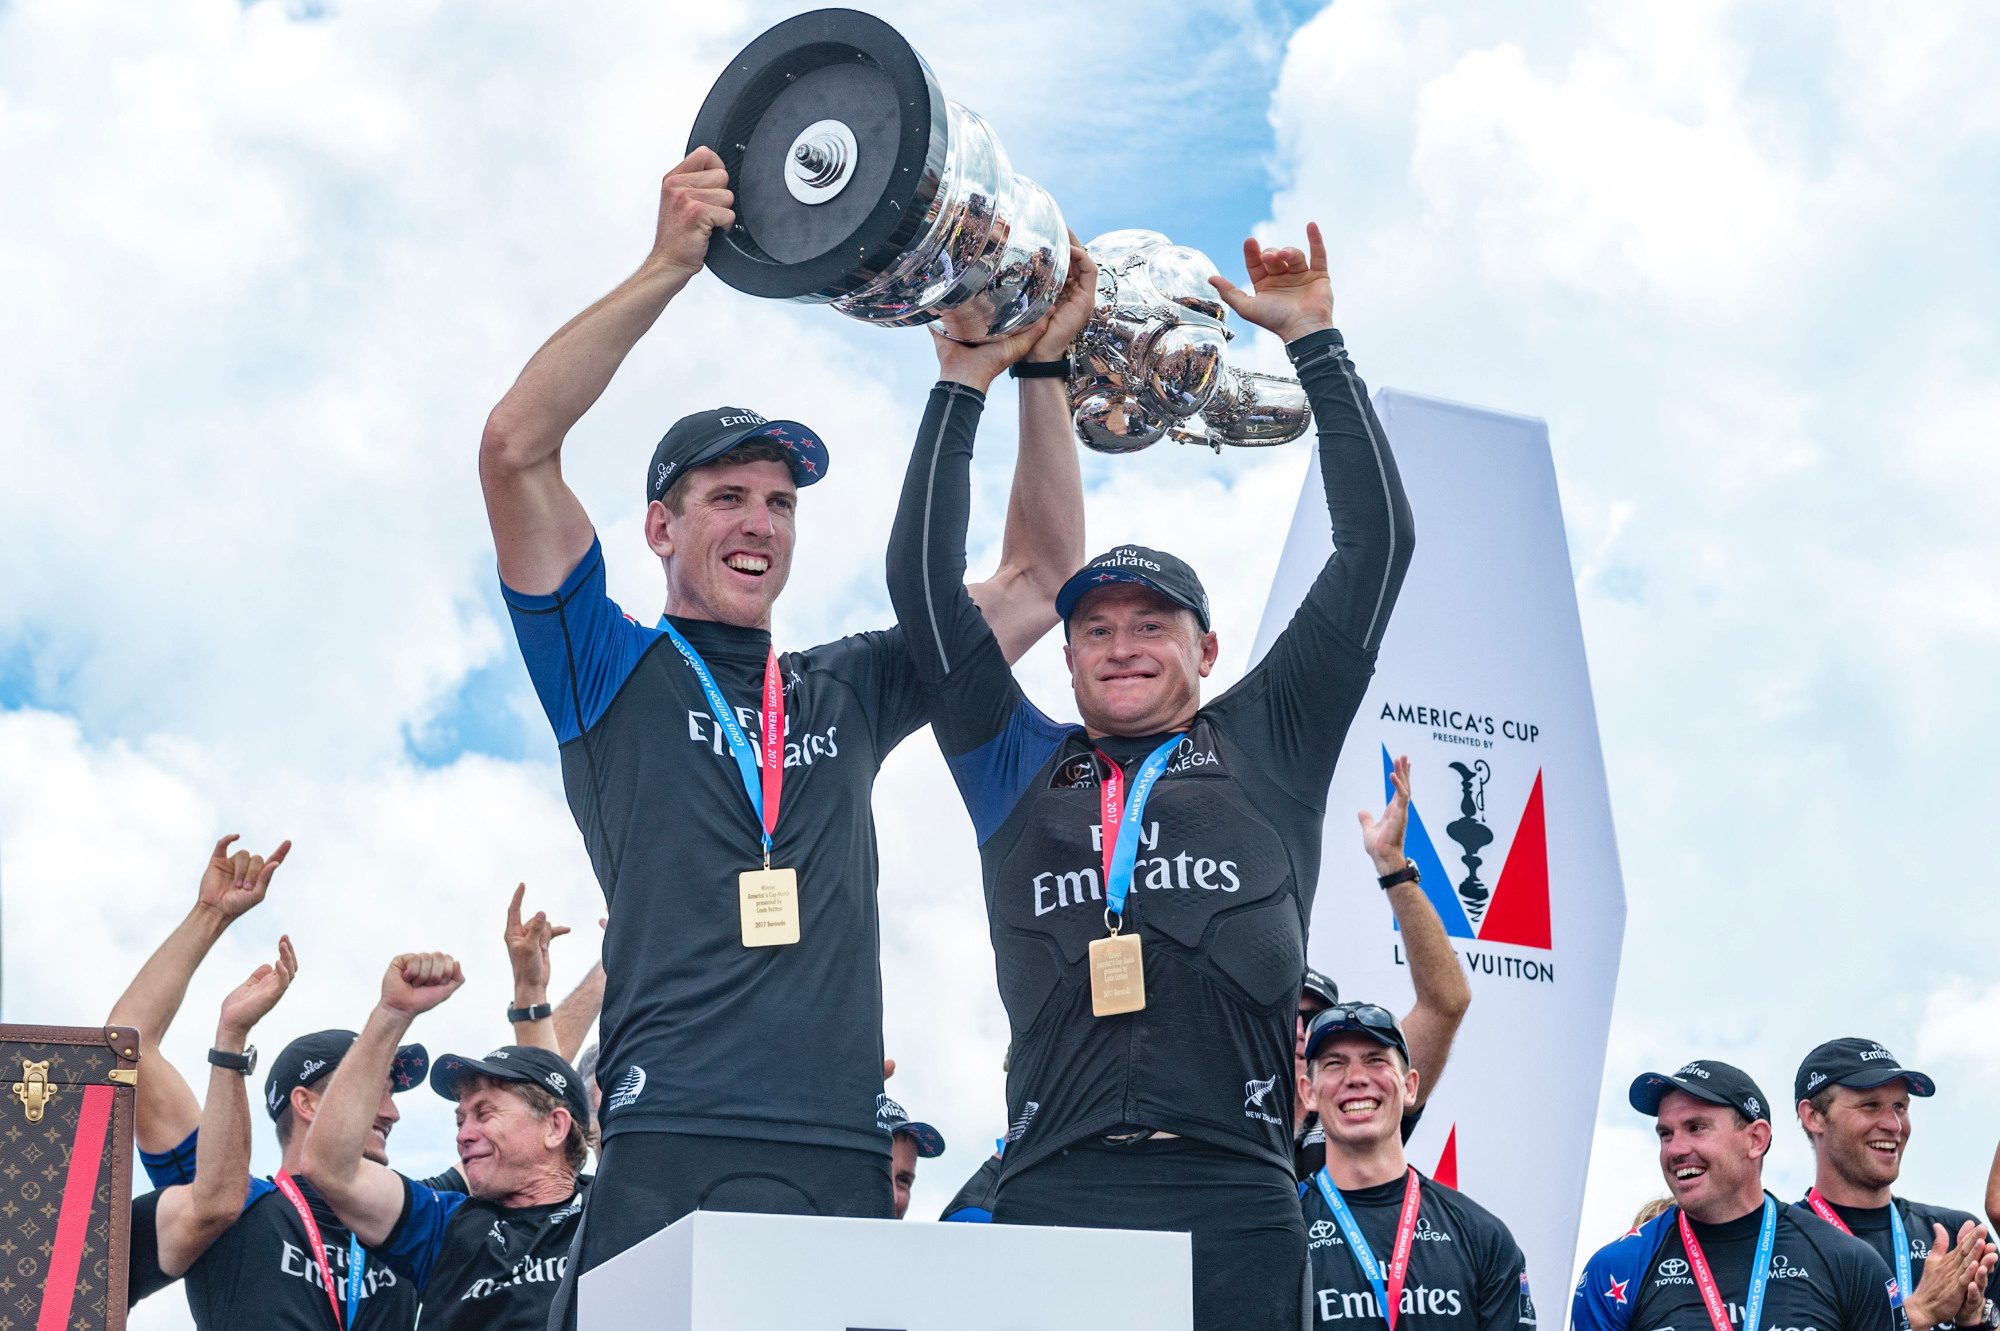 Team New Zealand completes rout to capture America's Cup | The Japan Times